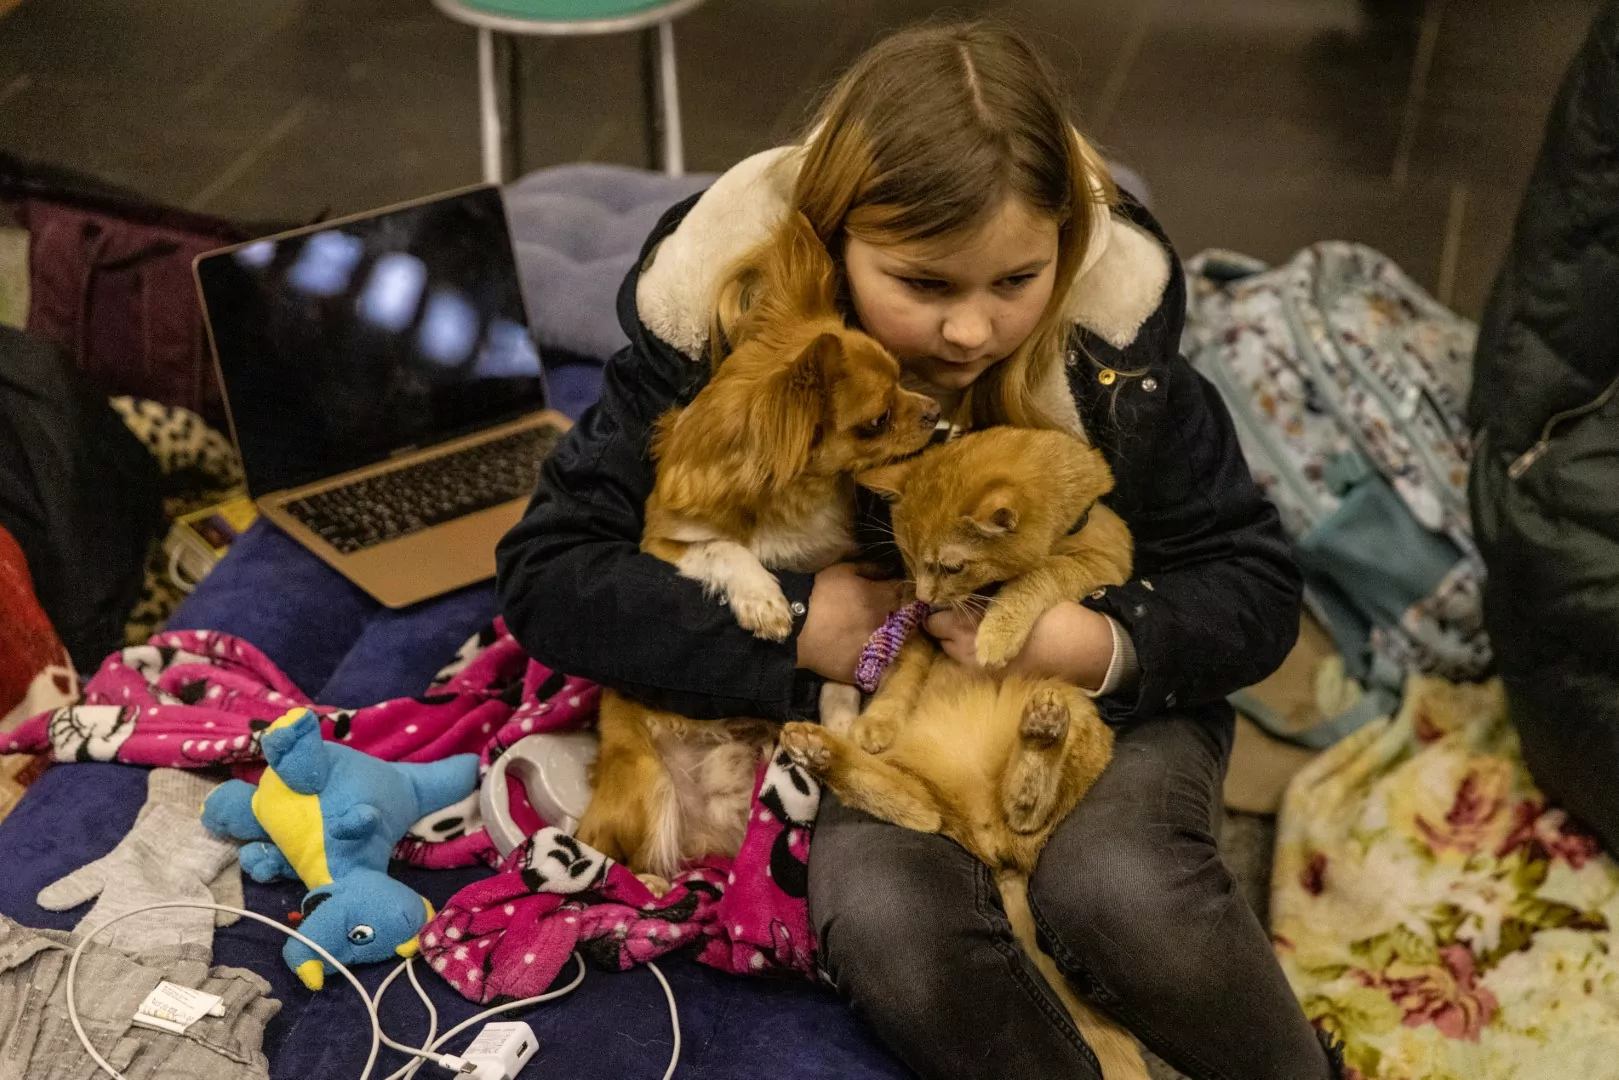 KYIV, UKRAINE - MARCH 02: A girl sits with her dog and cat in the Dorohozhychi subway station which has has been turned into a bomb shelter on March 02, 2022 in Kyiv, Ukraine. Russian forces continued their advance on the Ukrainian capital for the seventh day as the country's invasion of its western neighbour goes on. Intense battles are also being waged over Ukraine's other major cities. (Photo by Chris McGrath/Getty Images)